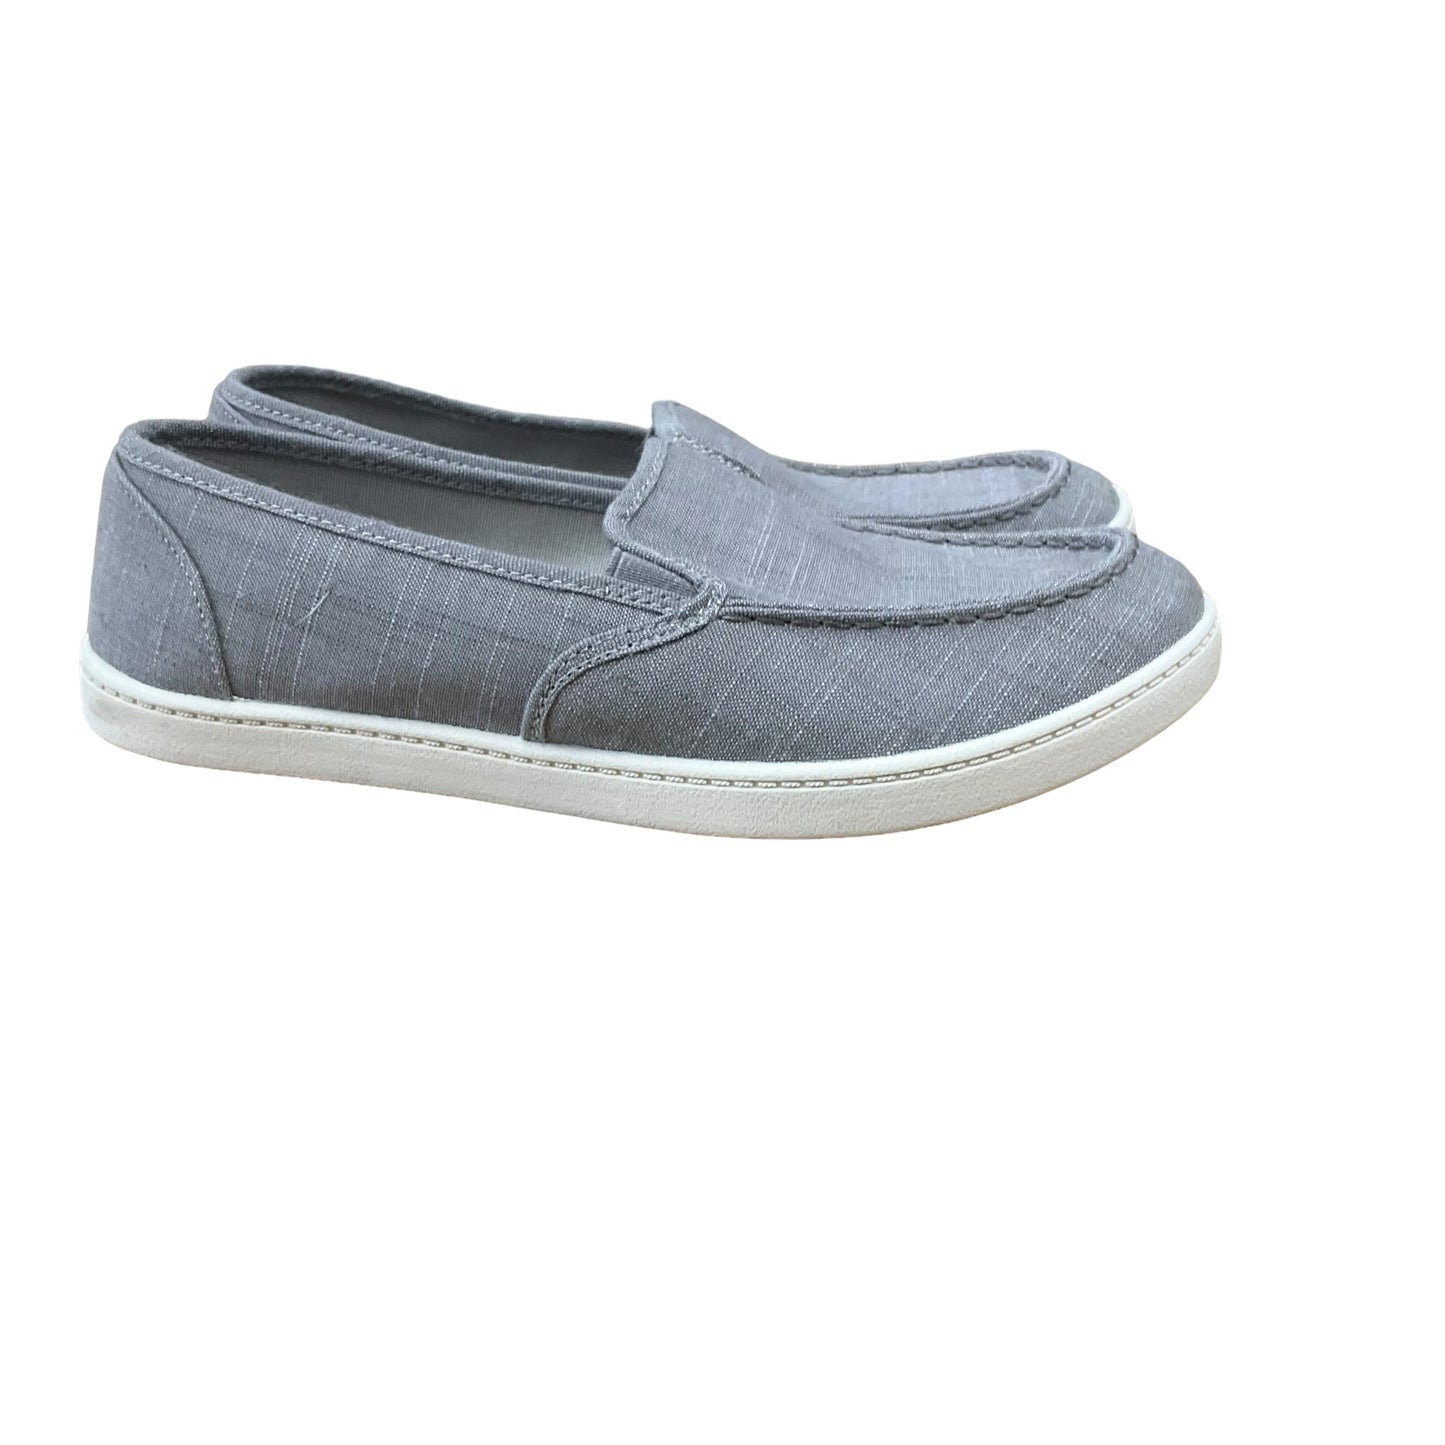 Grey Shoes Flats Time And Tru, Size 8.5